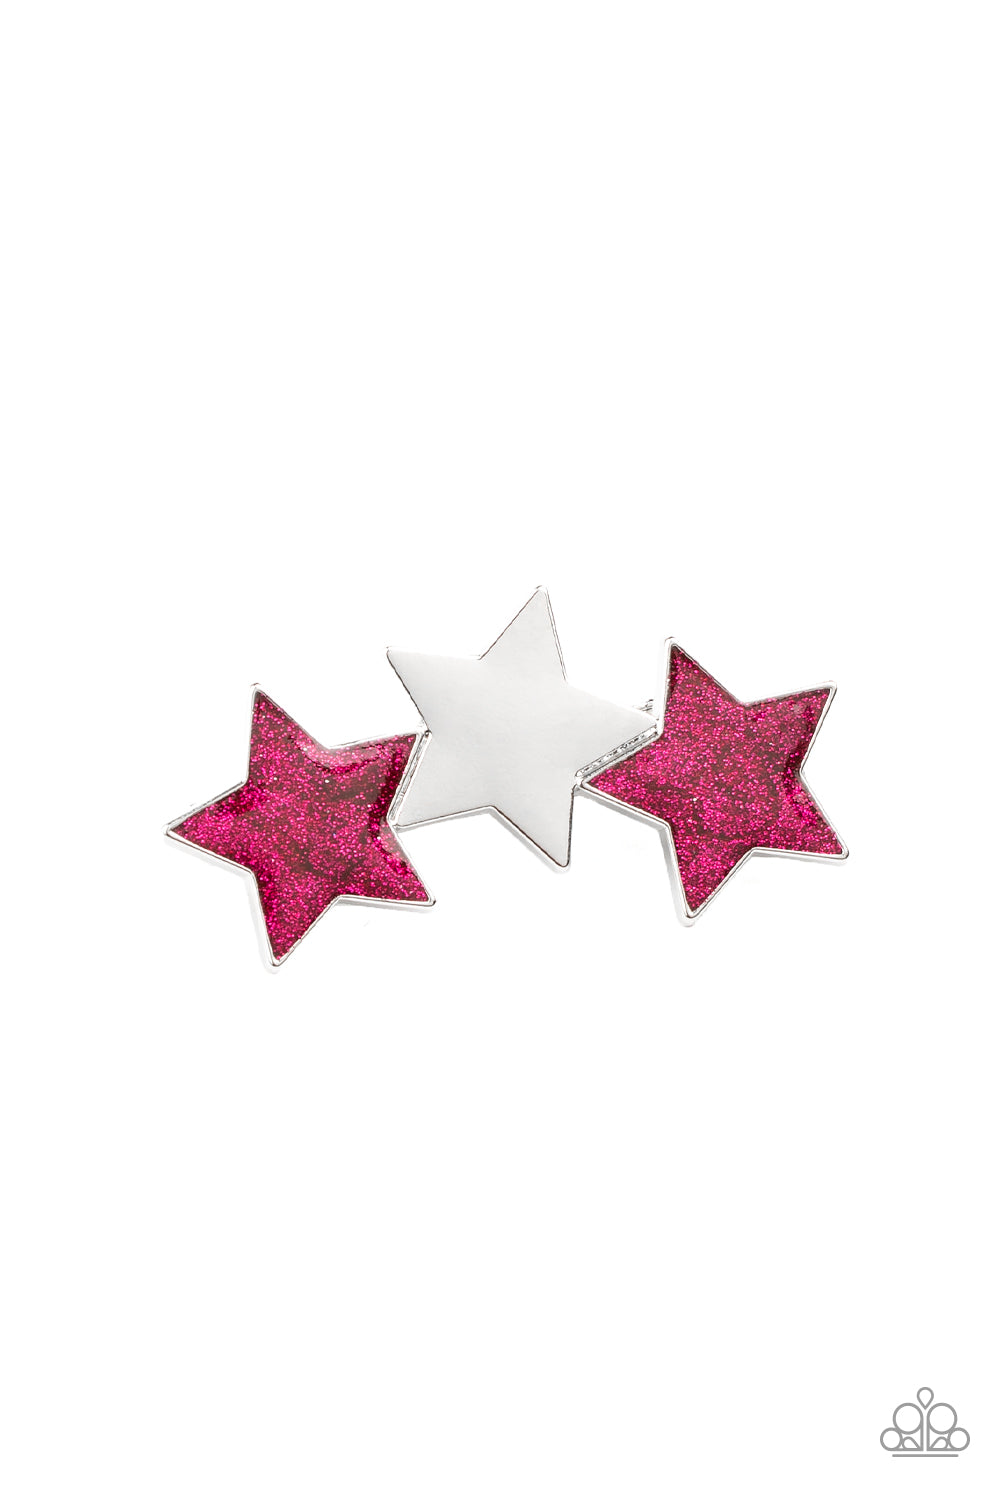 Don't Get Me STAR-ted!- Pink and Silver Hair Clip- Paparazzi Accessories